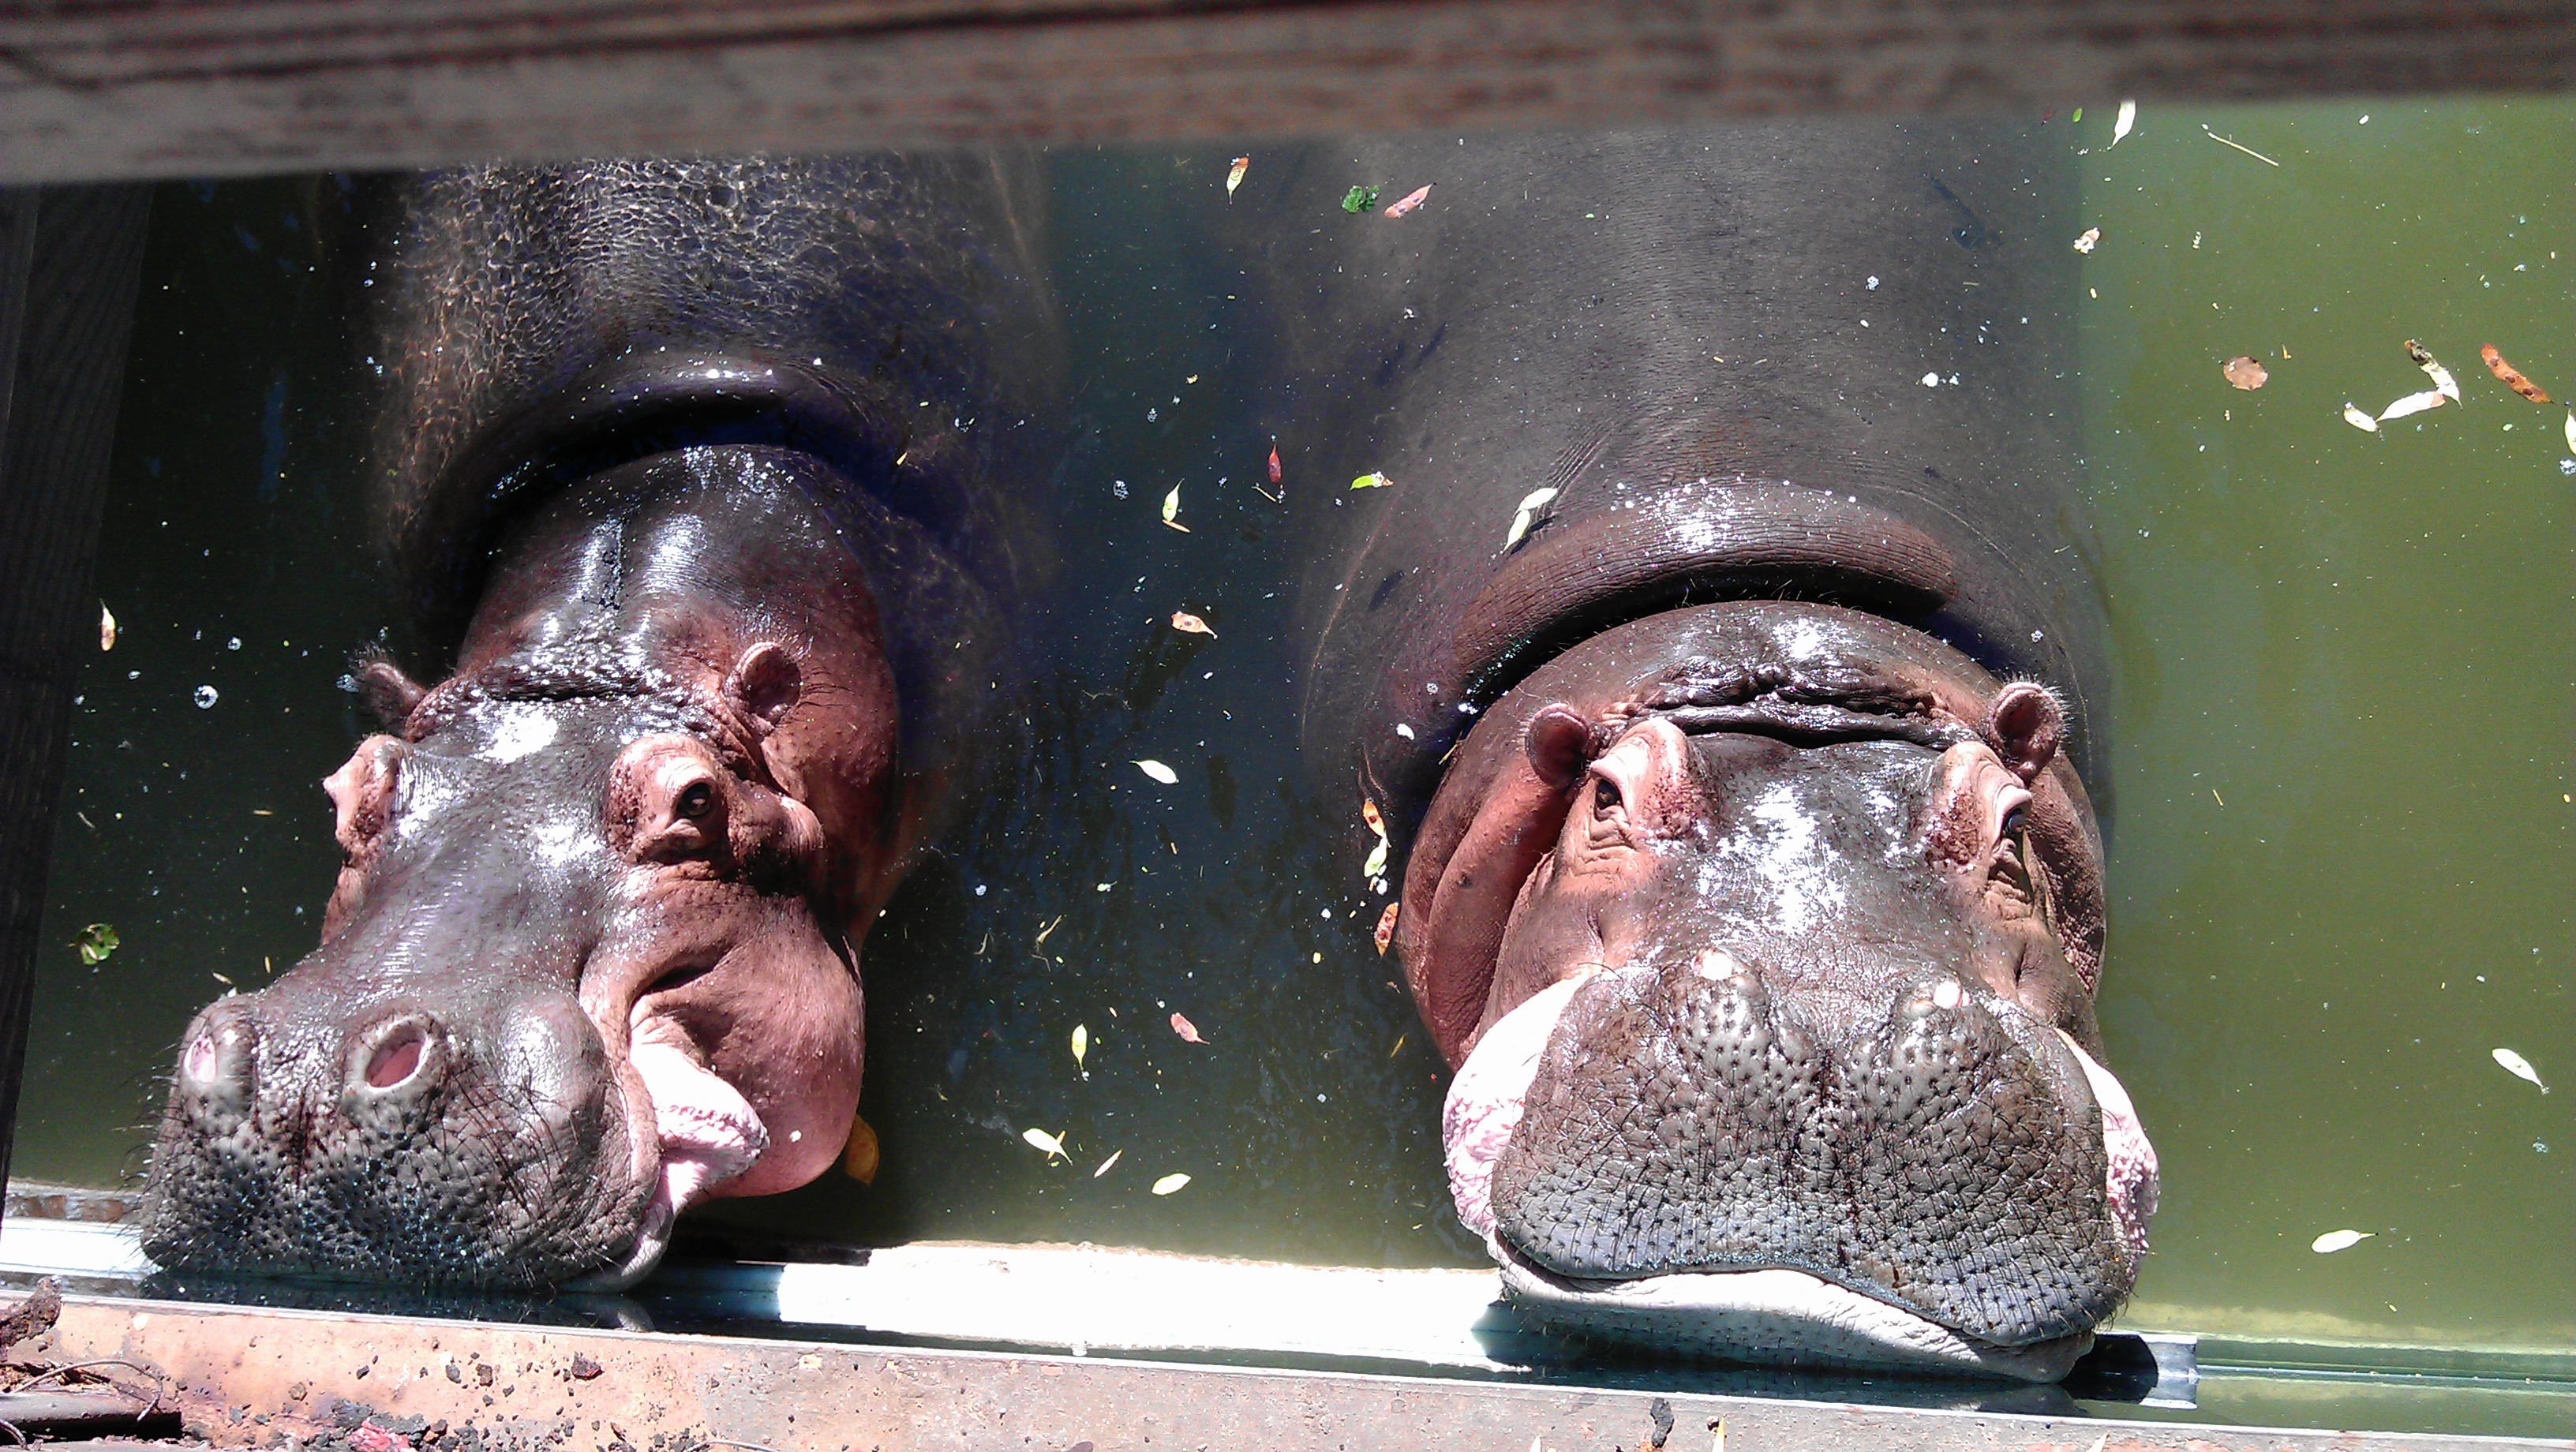 1/5/12 hippo noses